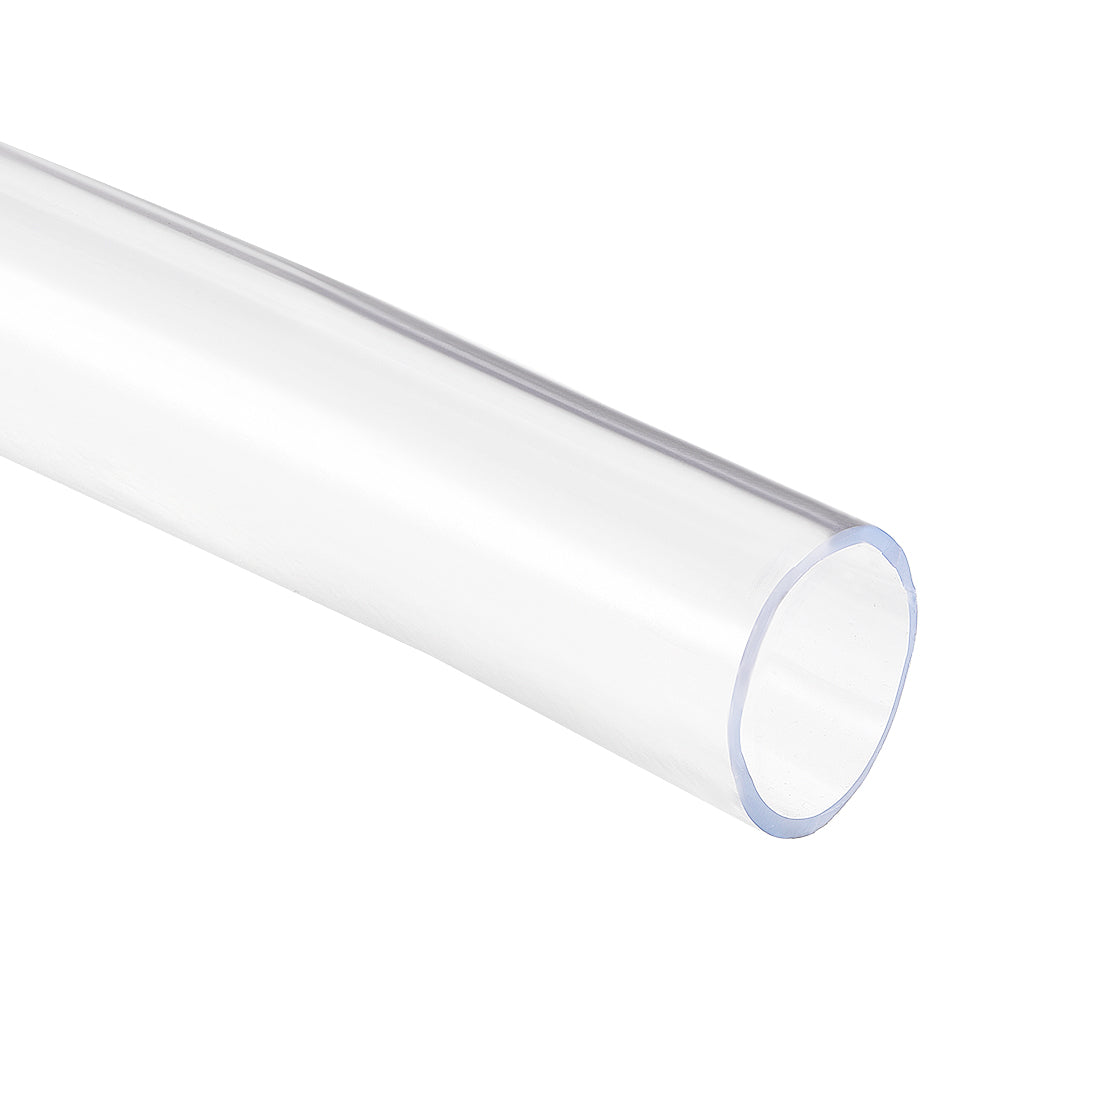 uxcell Uxcell PVC Hose Tube, 50mm(1.96") ID x 57mm(2.24") OD 1m Clear Vinyl Tubing